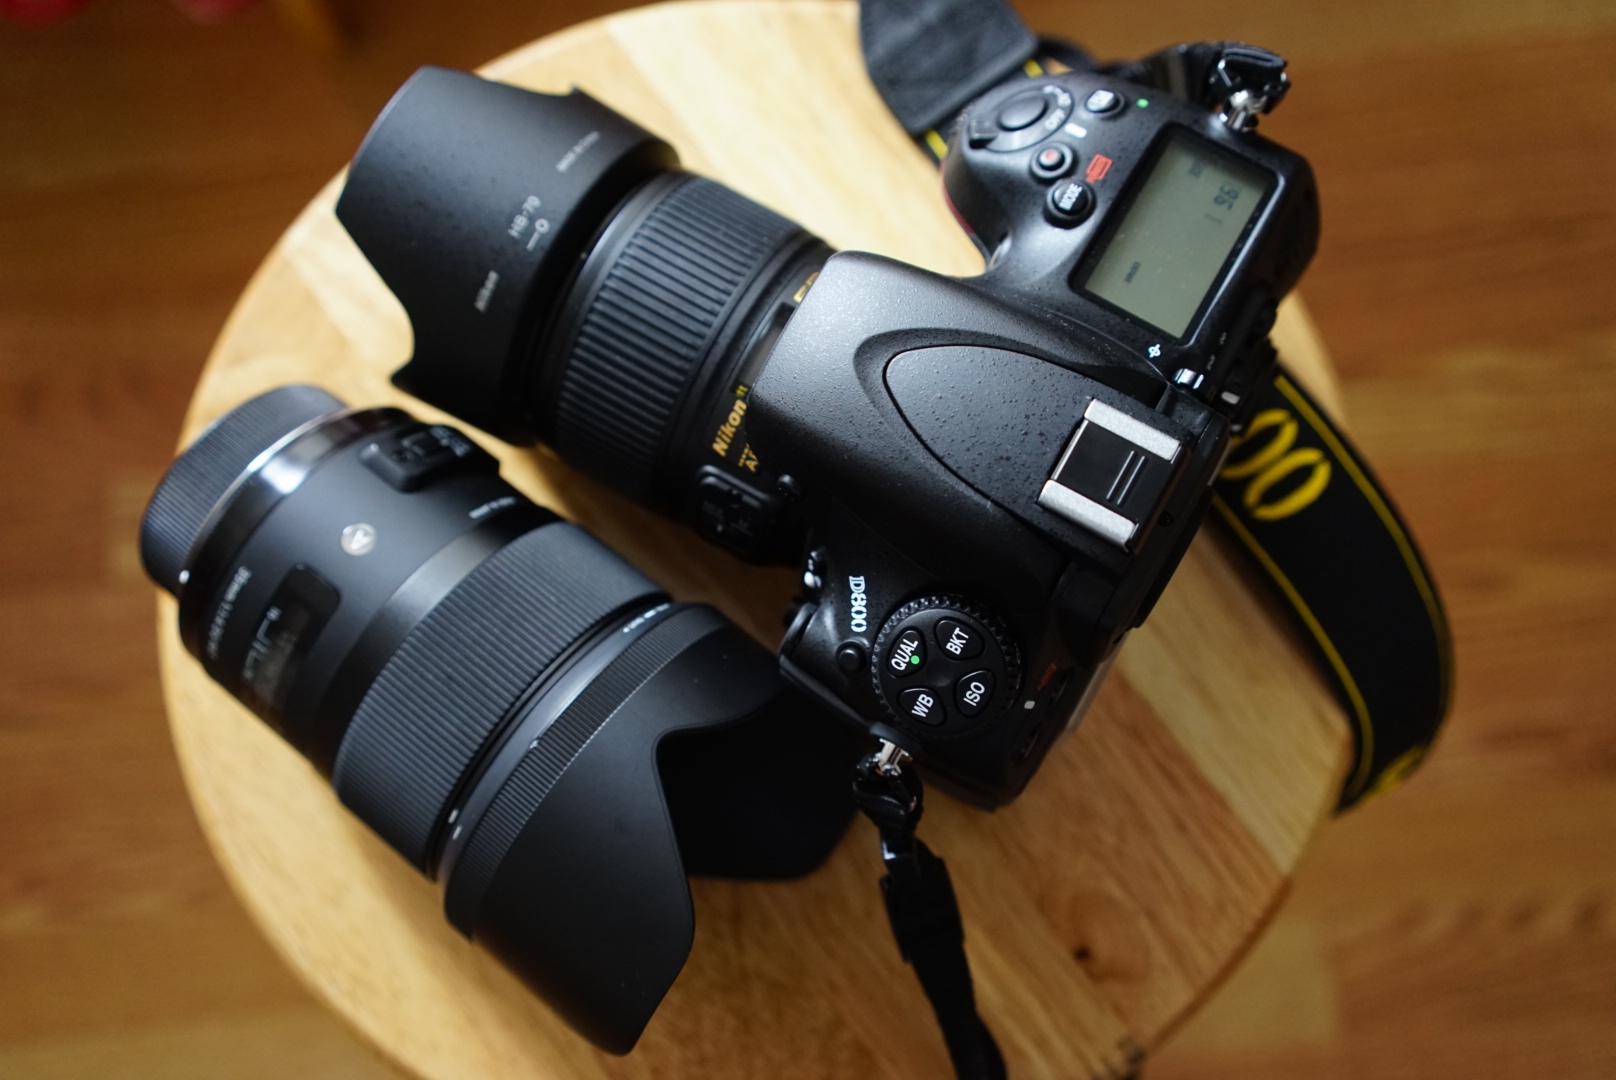 Prime Lenses: A Quick Look at a Few of Our Favorite 35mm and 50mm Primes (Nikon Edition)